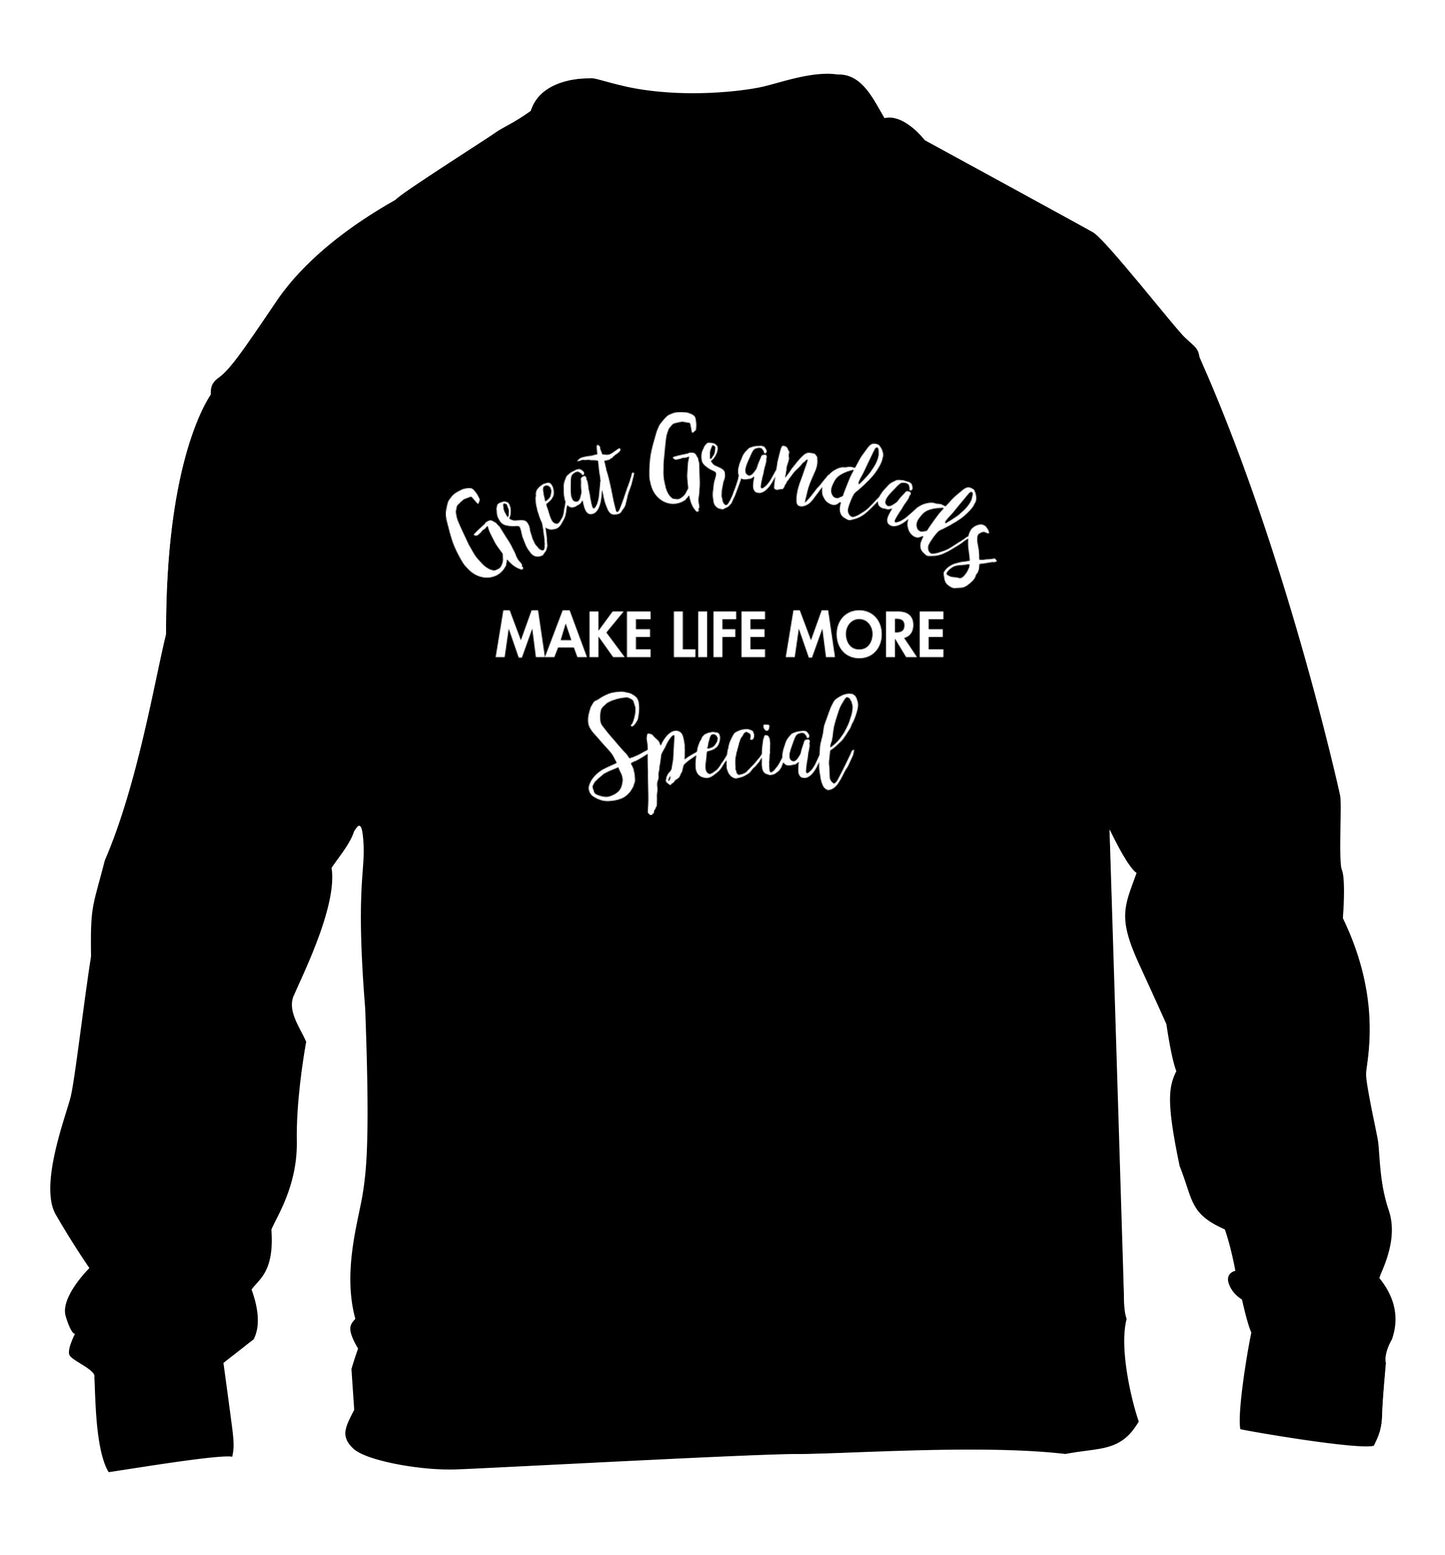 Great Grandads make life more special children's black sweater 12-14 Years